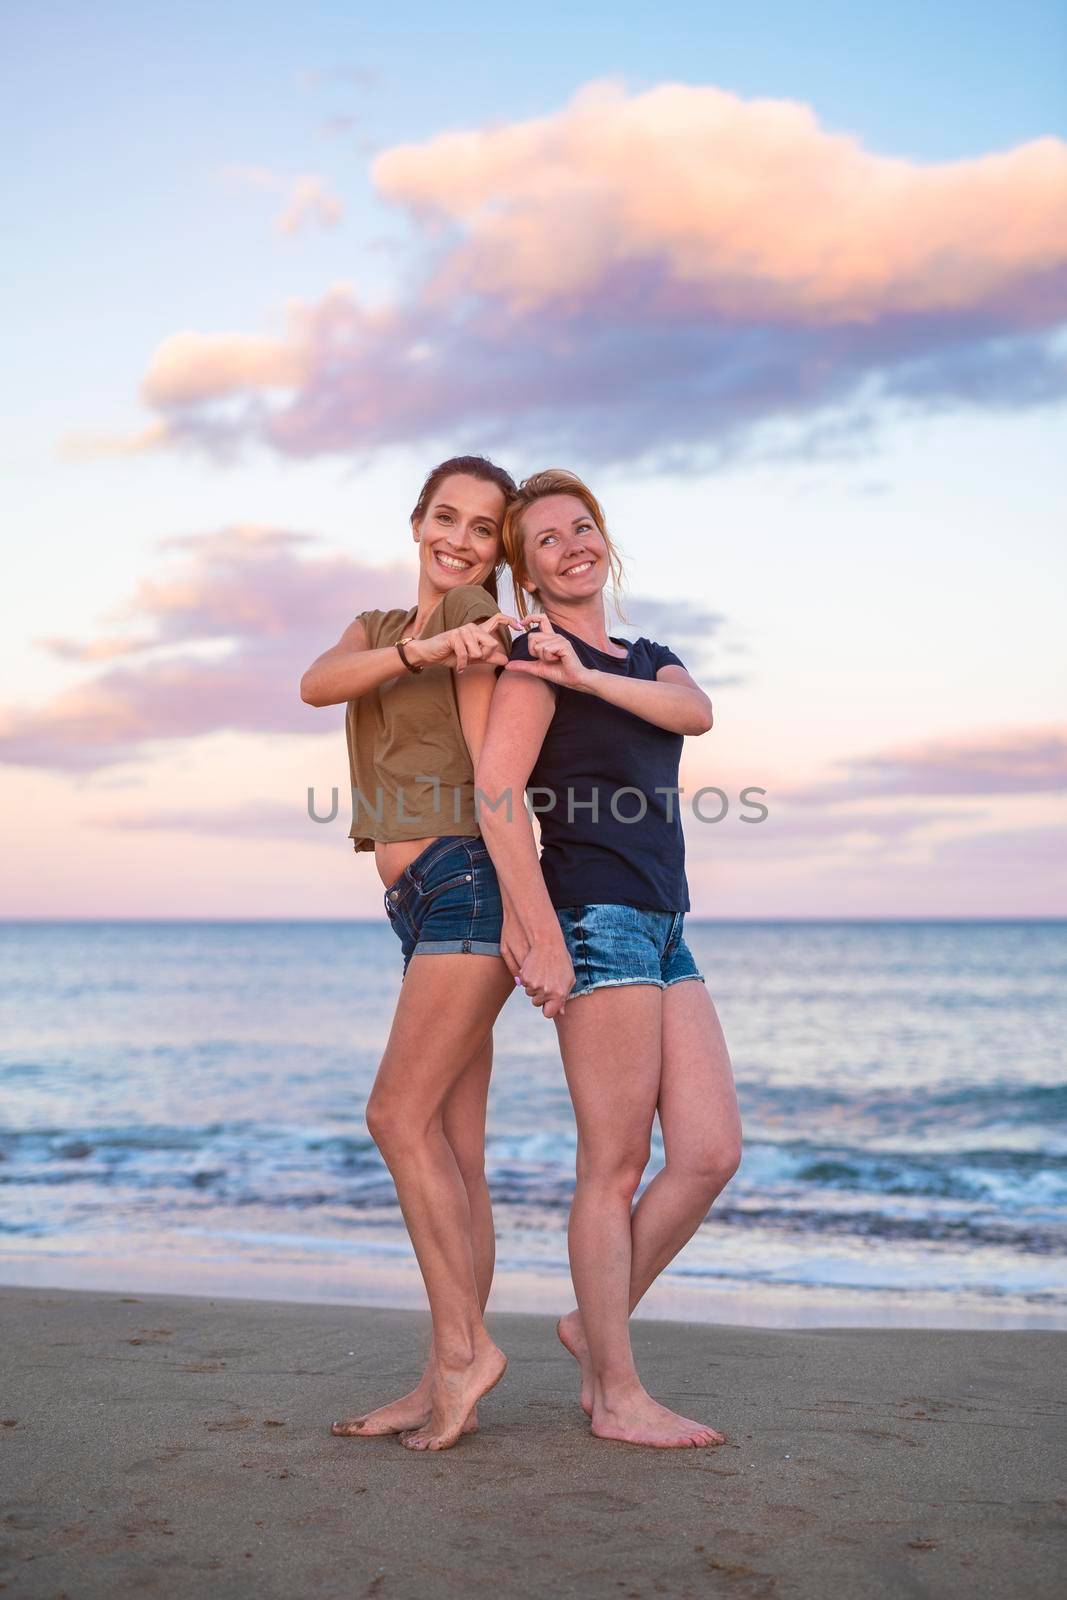 leisure and friendship concept - two happy smiling teenage girls or best friends at seaside making hand heart gesture at sunset.